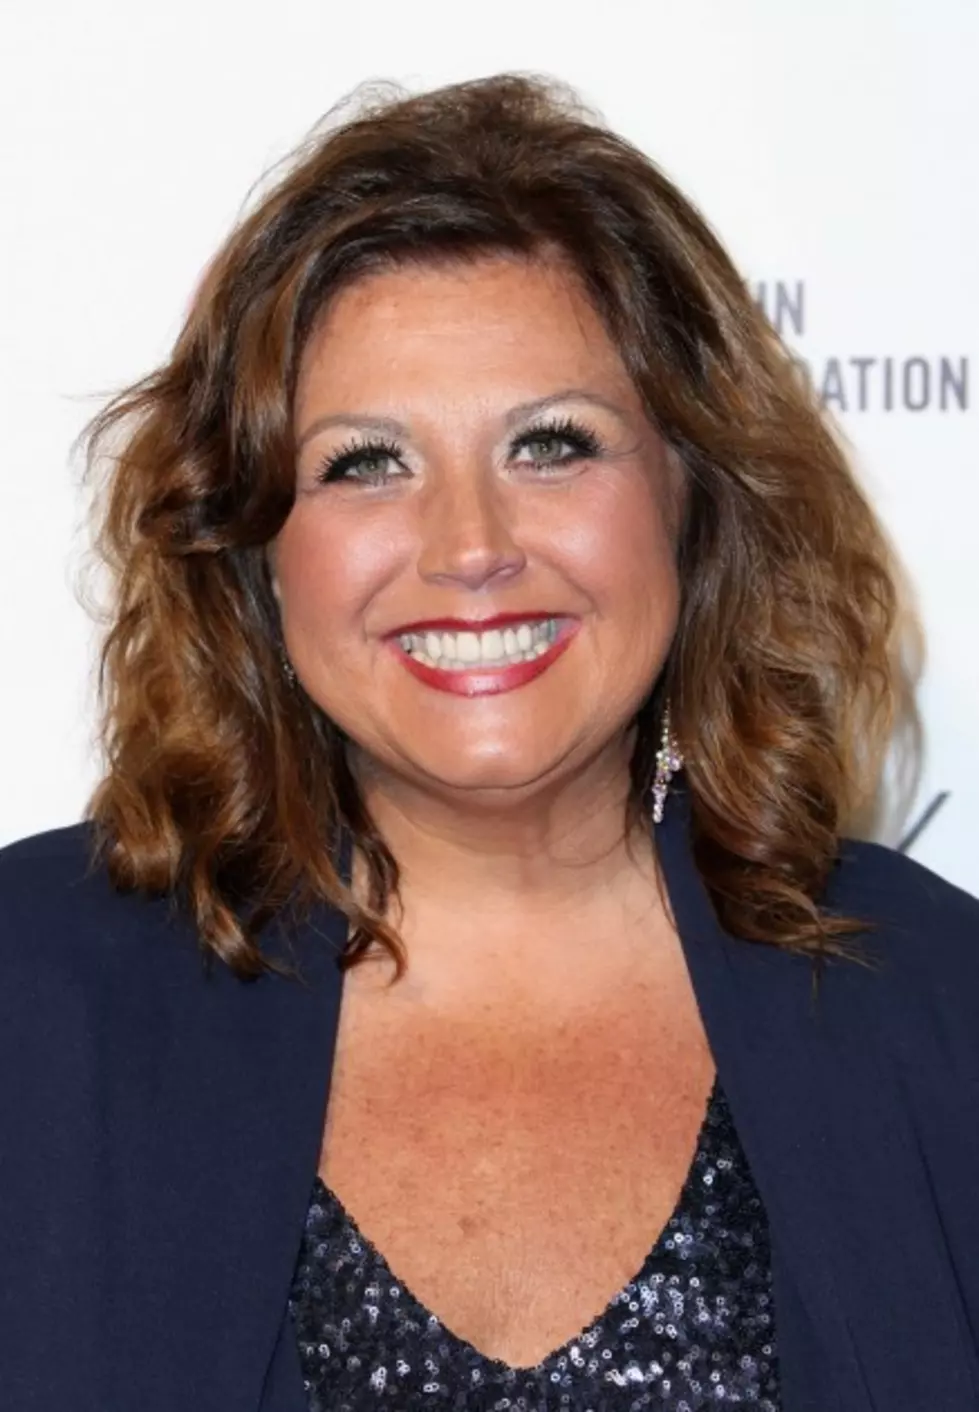 Dance Moms Star Abby Lee Miller Indicted on Fraud Charges